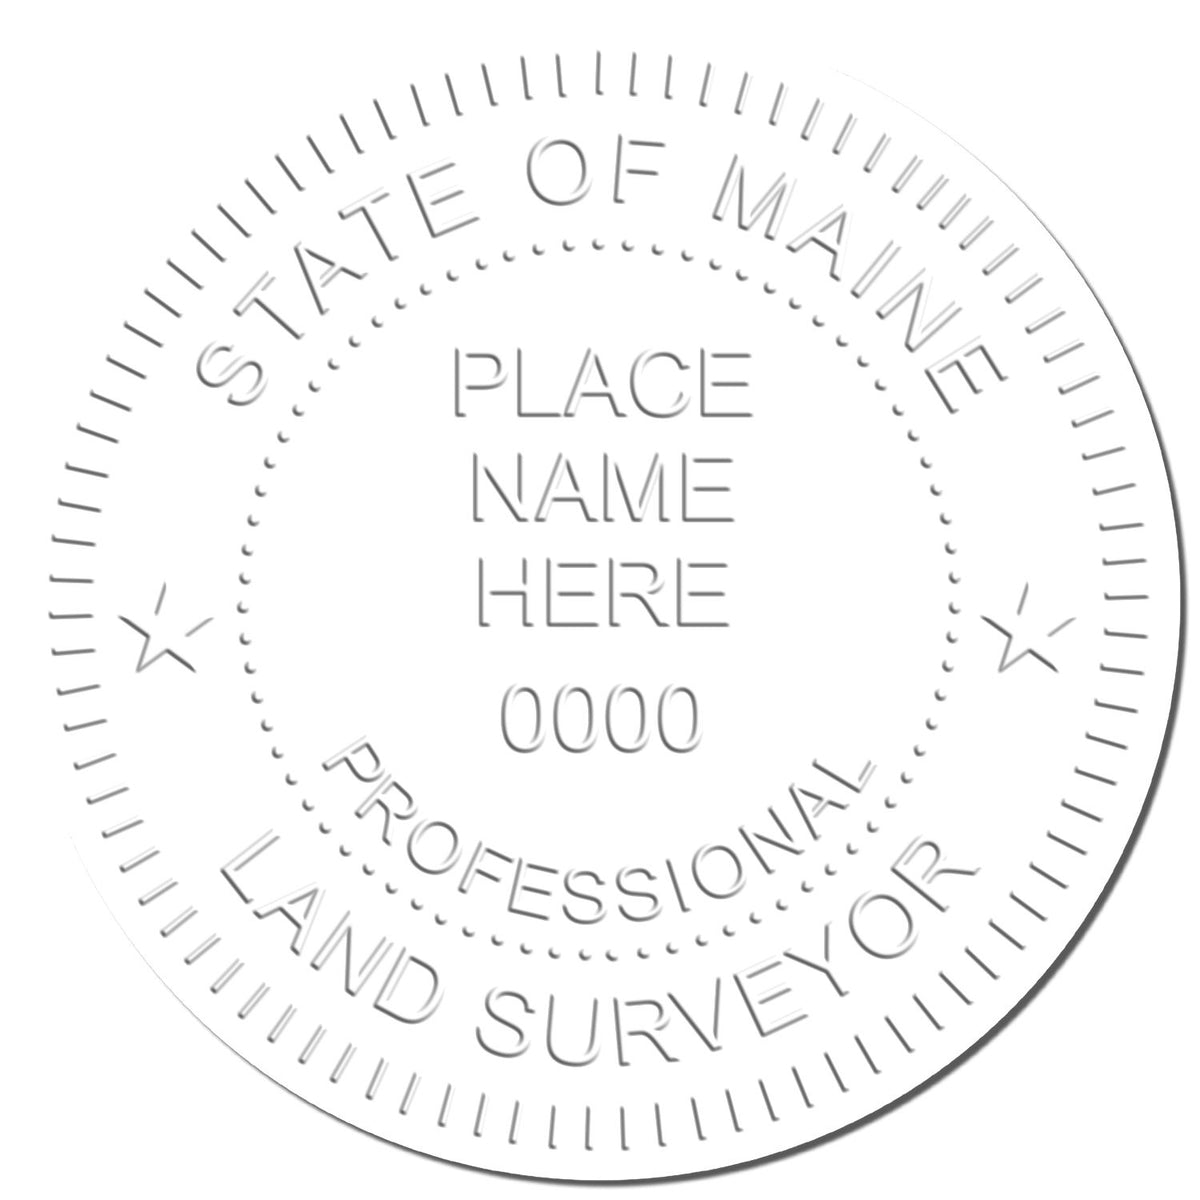 This paper is stamped with a sample imprint of the State of Maine Soft Land Surveyor Embossing Seal, signifying its quality and reliability.